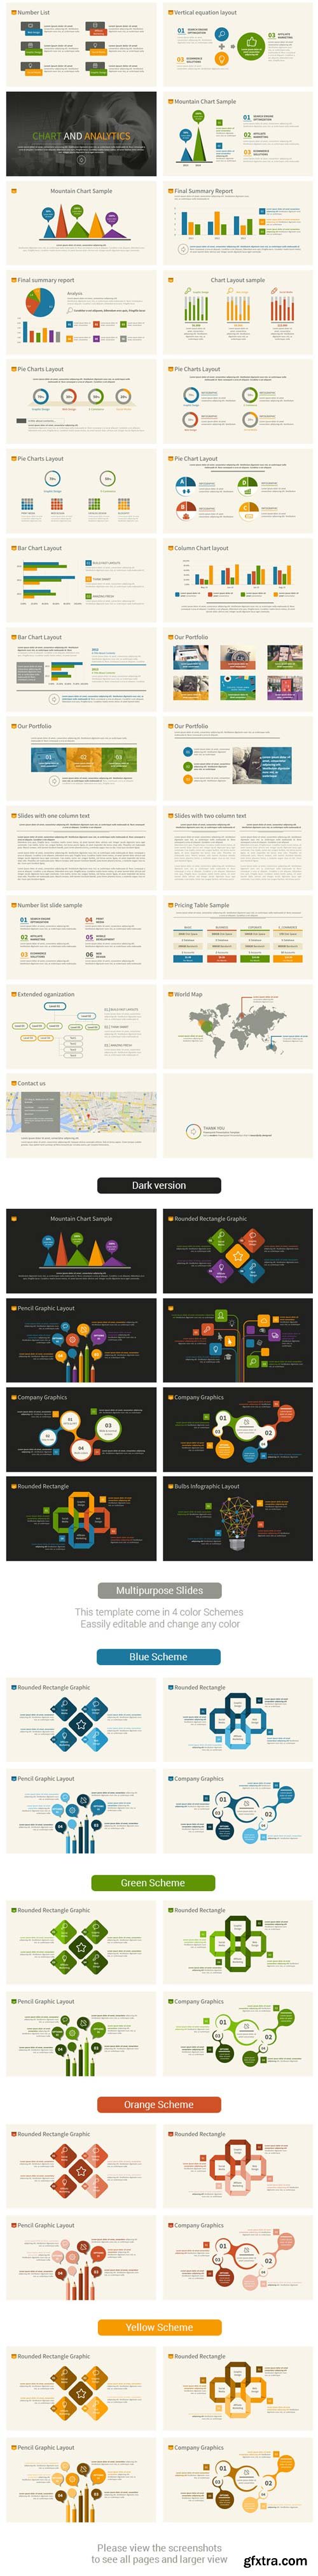 GraphicRiver - Infographic Keynote Template